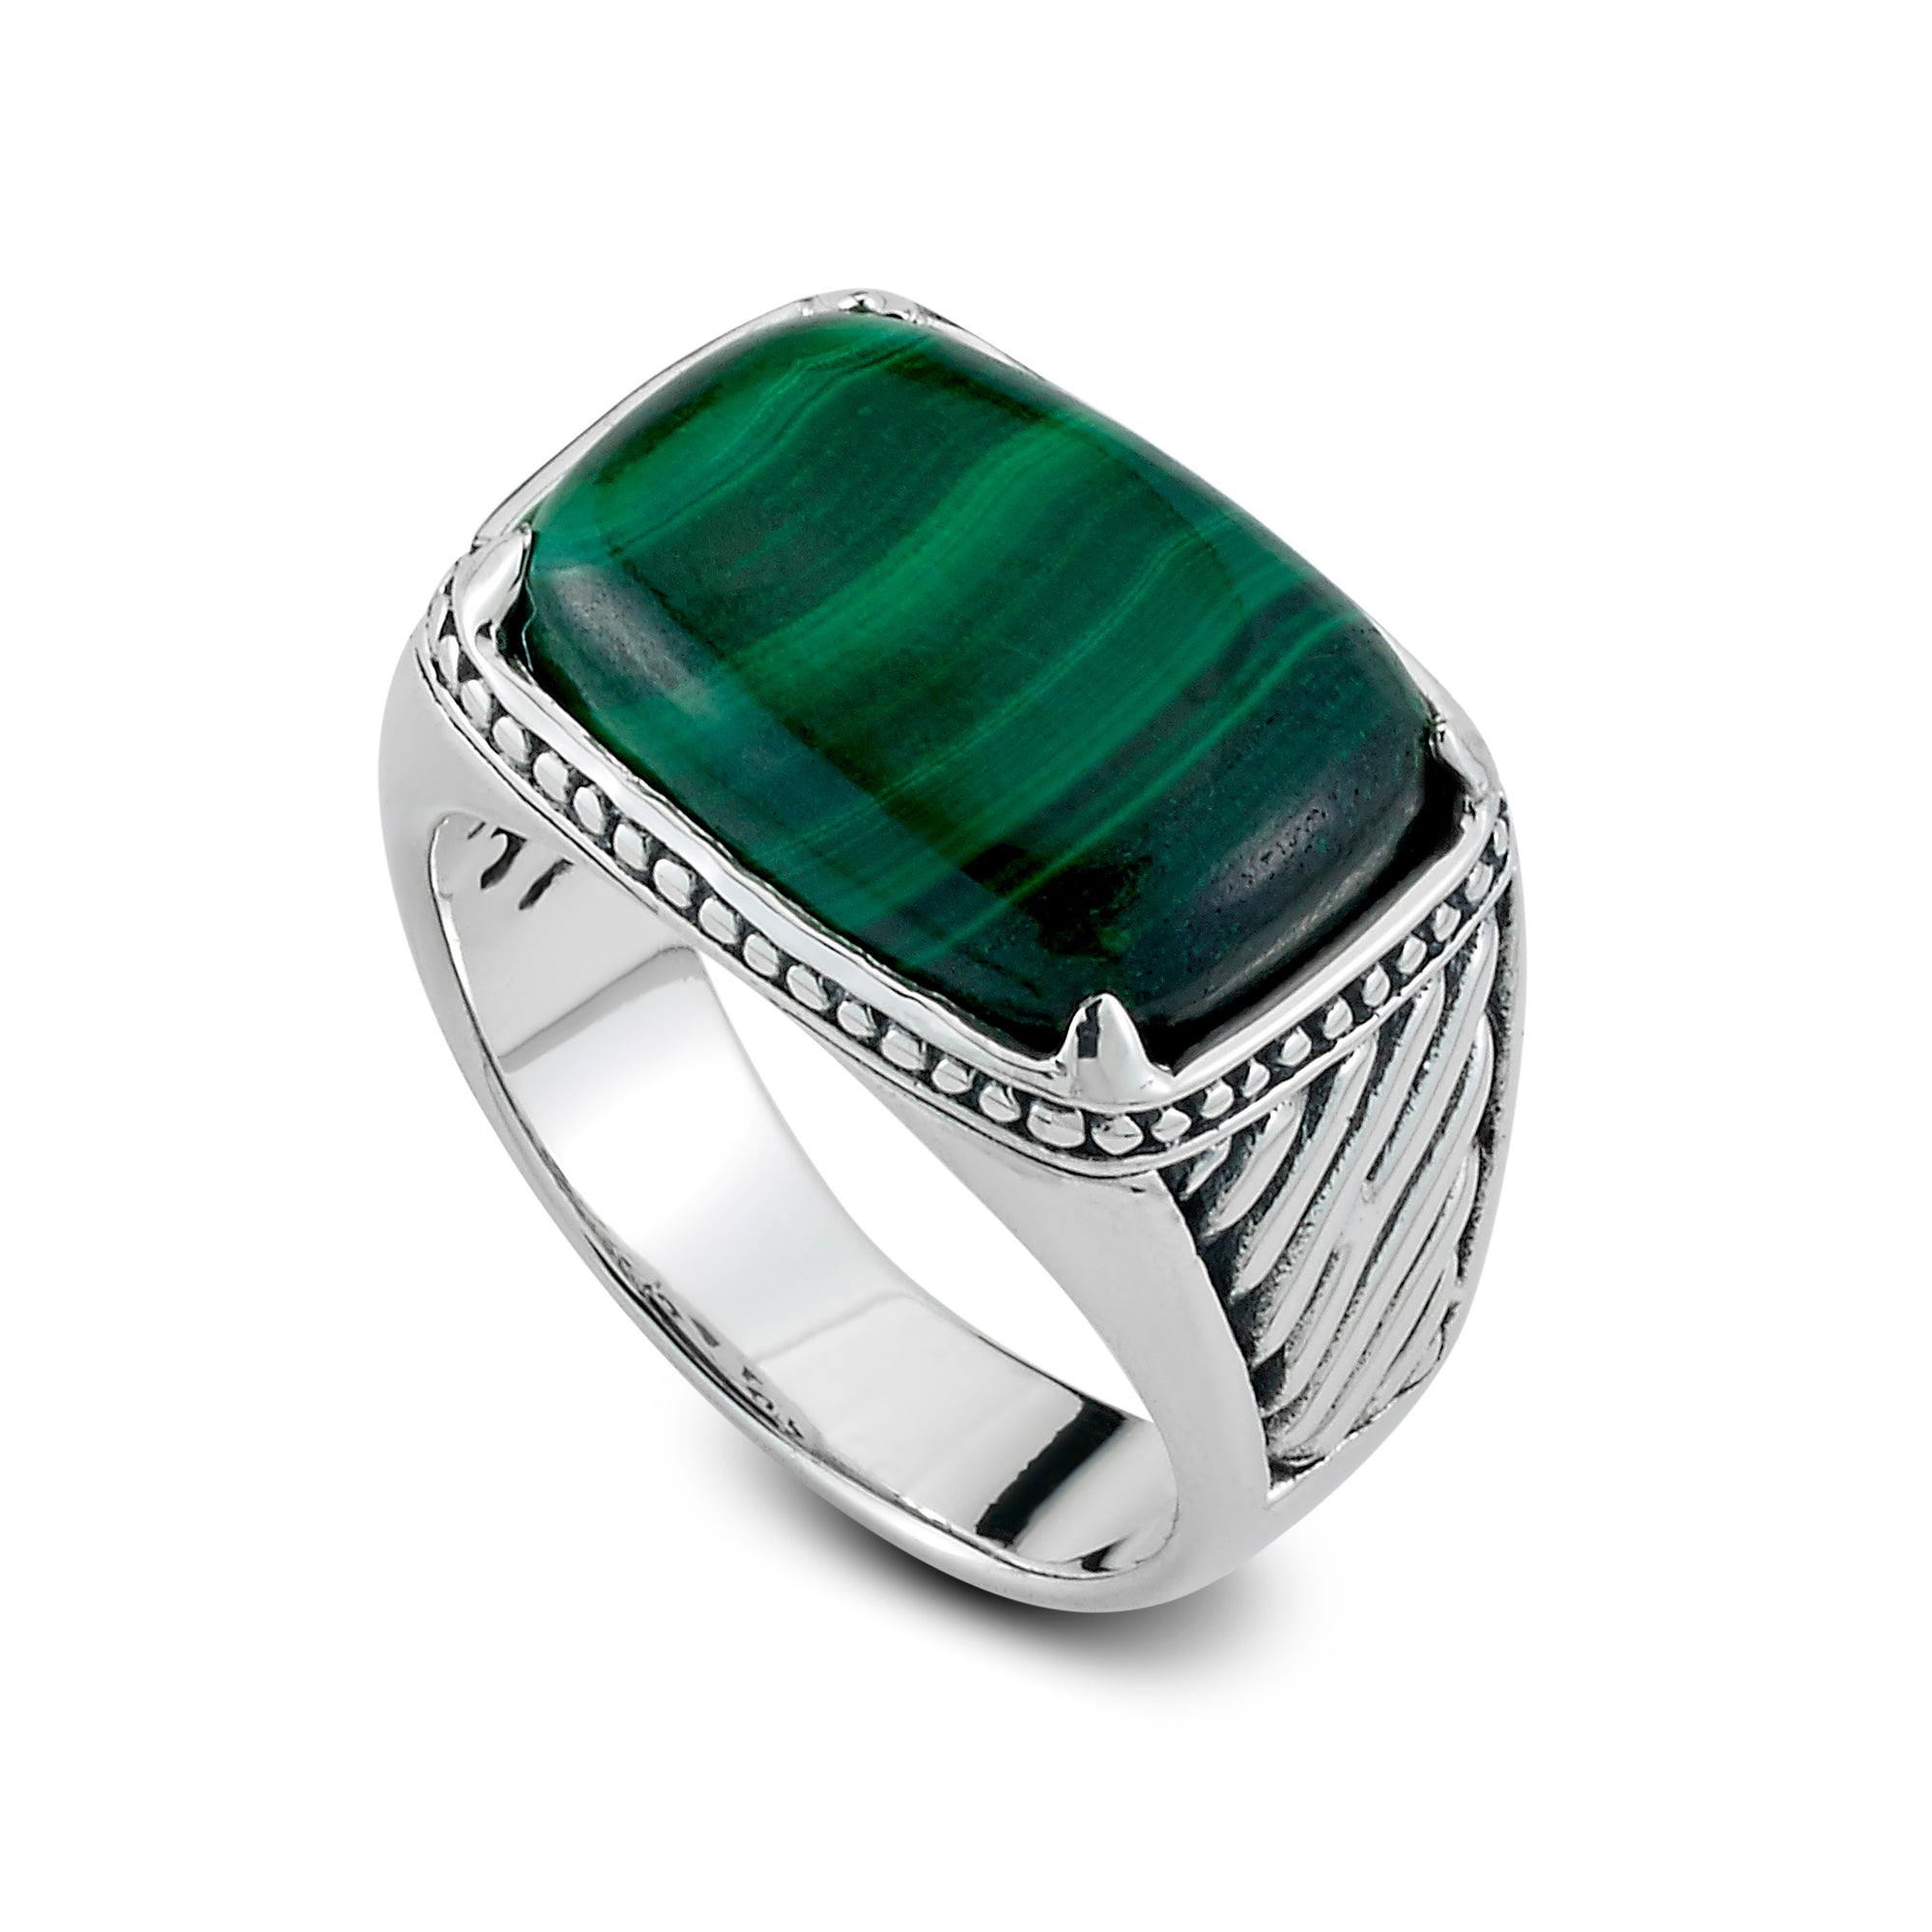 Malachite Forte Ring available at Talisman Collection Fine Jewelers in El Dorado Hills, CA and online. Specs: Malachite Forte Ring features a cushion-cut cabochon malachite gem set in Sterling Silver.